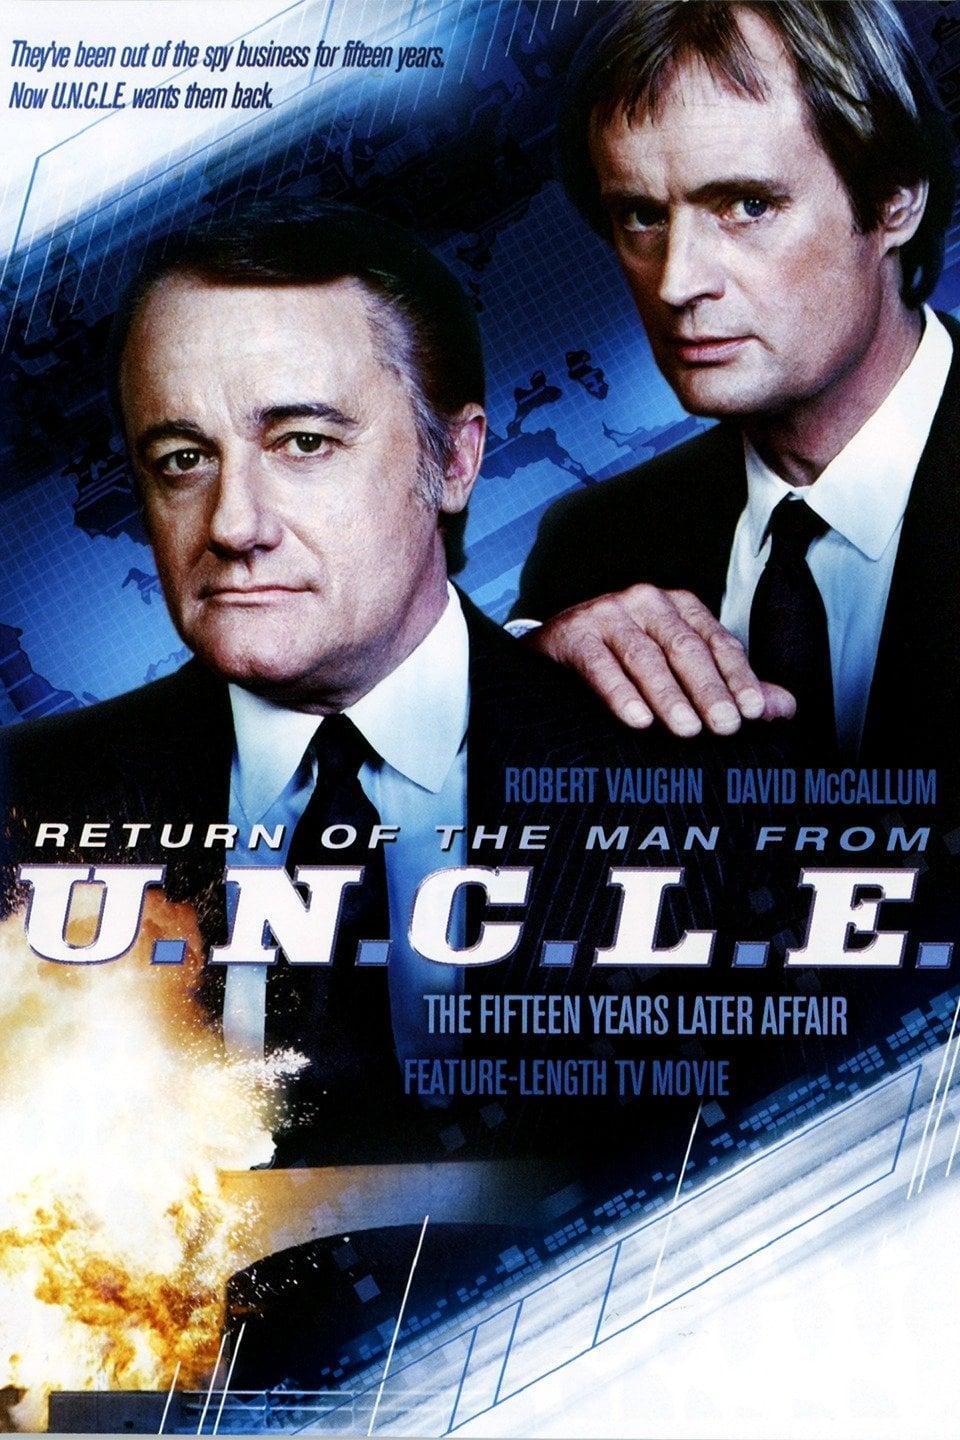 The Return of the Man from U.N.C.L.E.: The Fifteen Years Later Affair poster